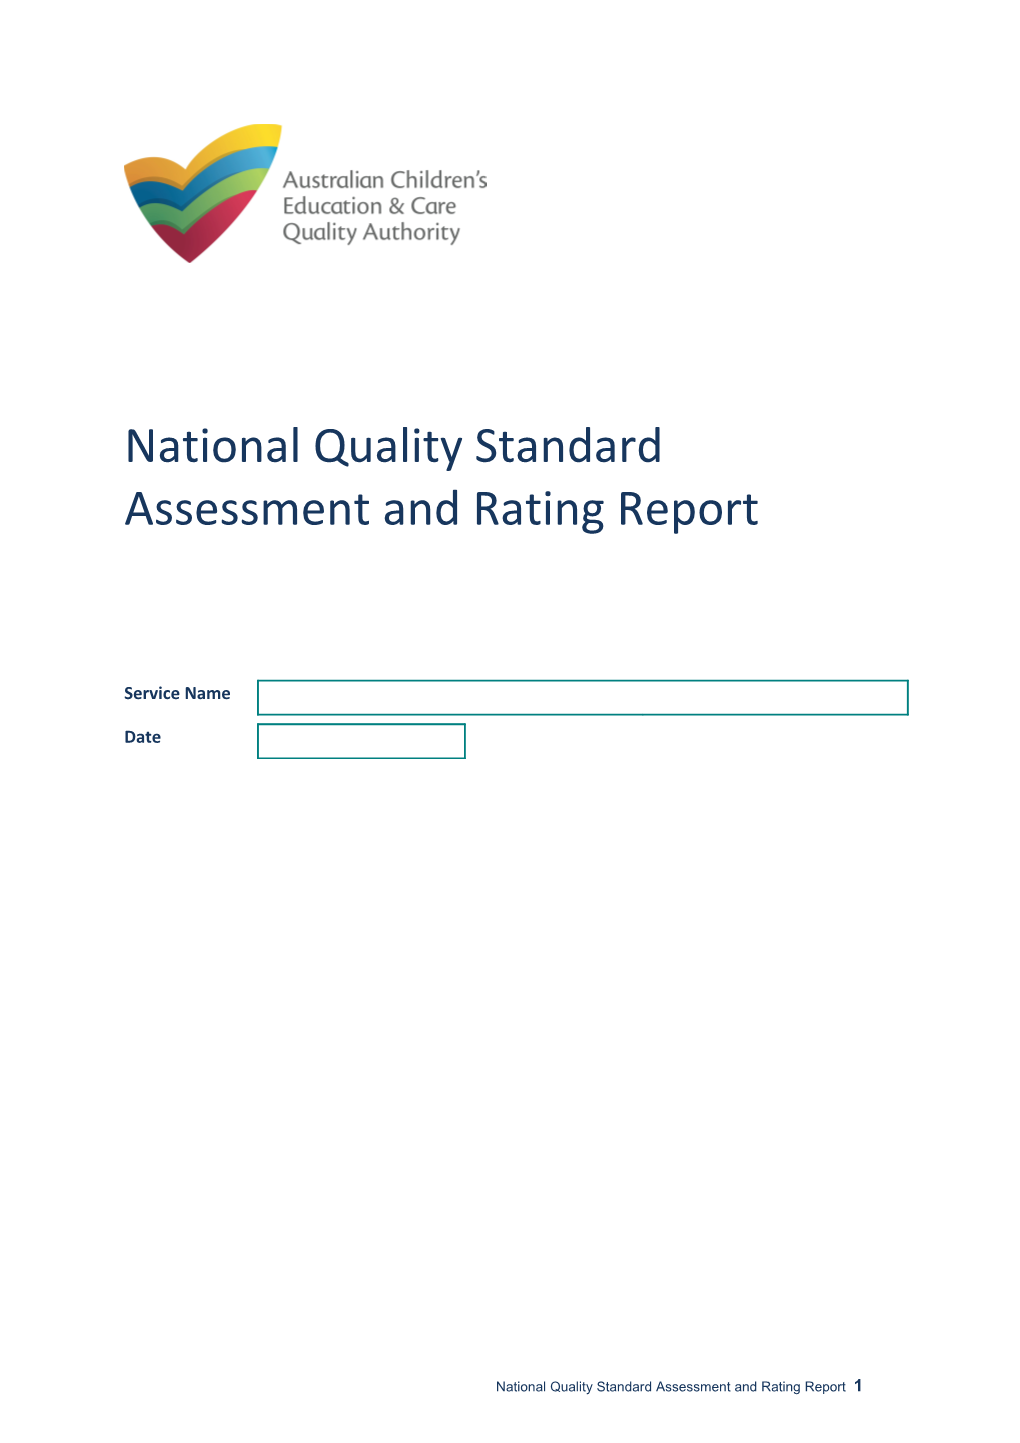 National Quality Standard Assessment and Rating Instrument